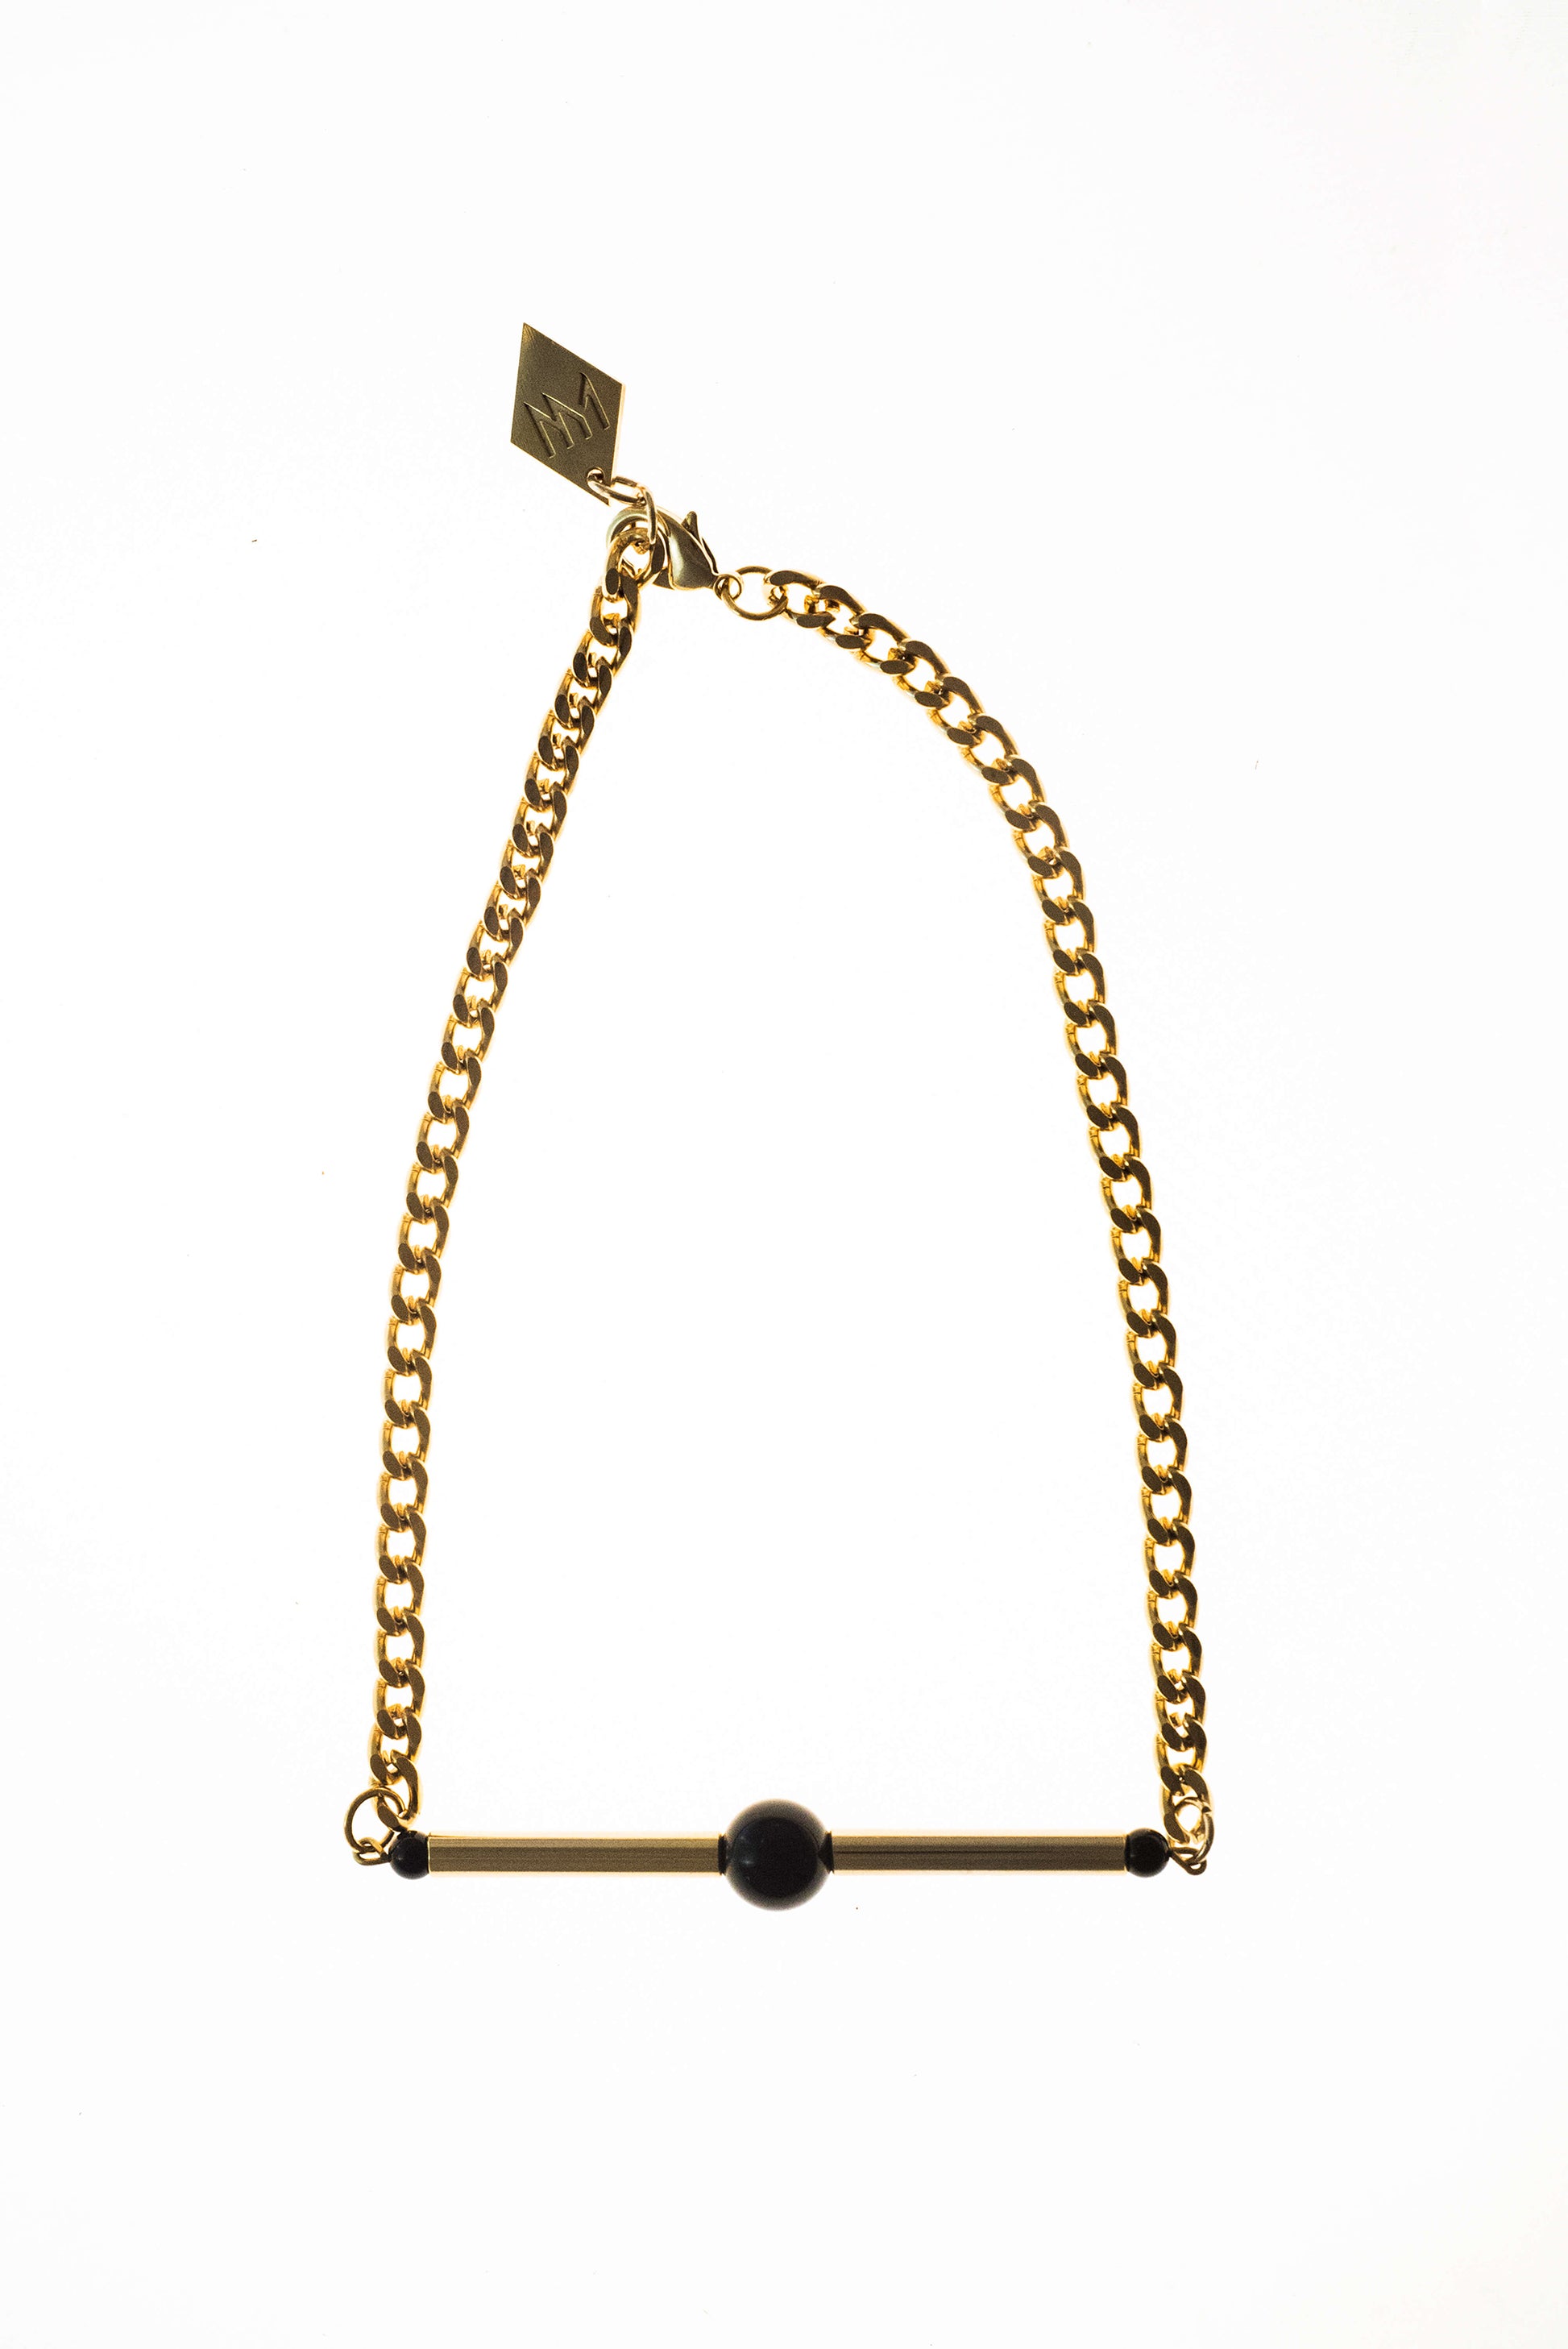 Line necklace made of hand-cut and 24K gold-plated brass, onyx and 24K gold-plated metal components.